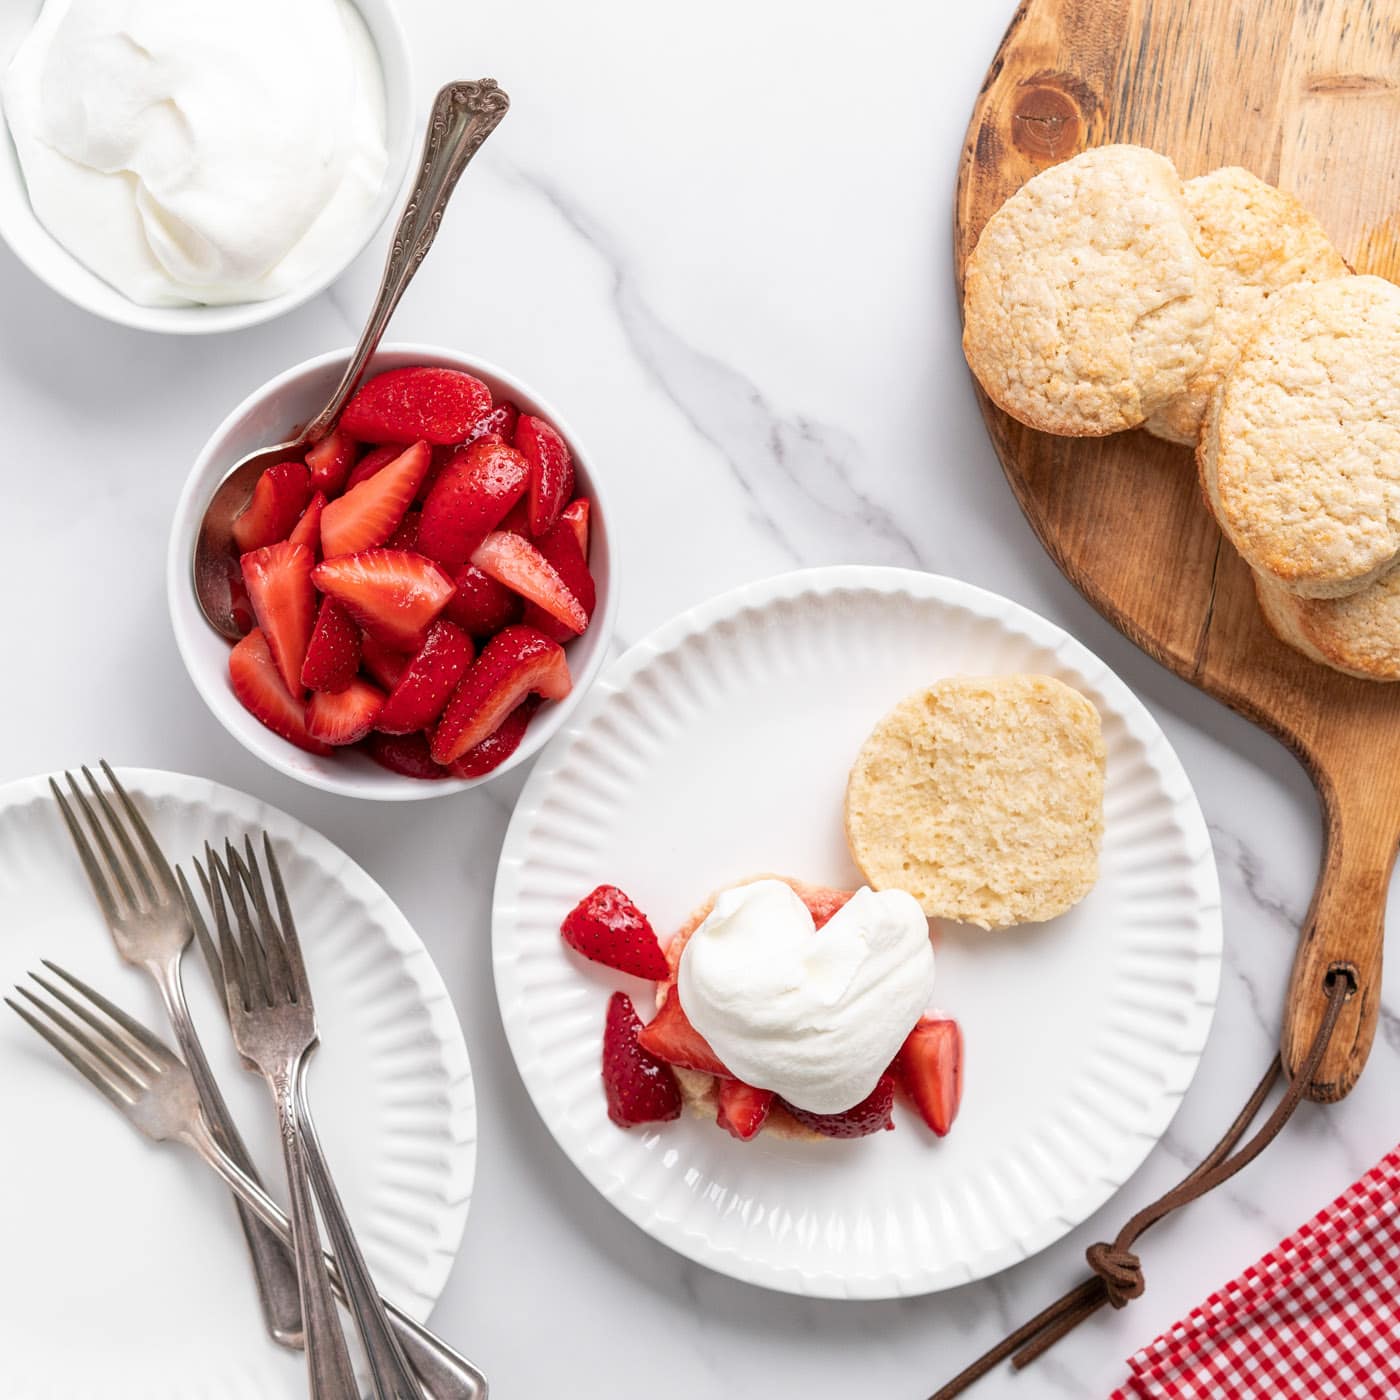 whipped cream on top of strawberries and biscuit